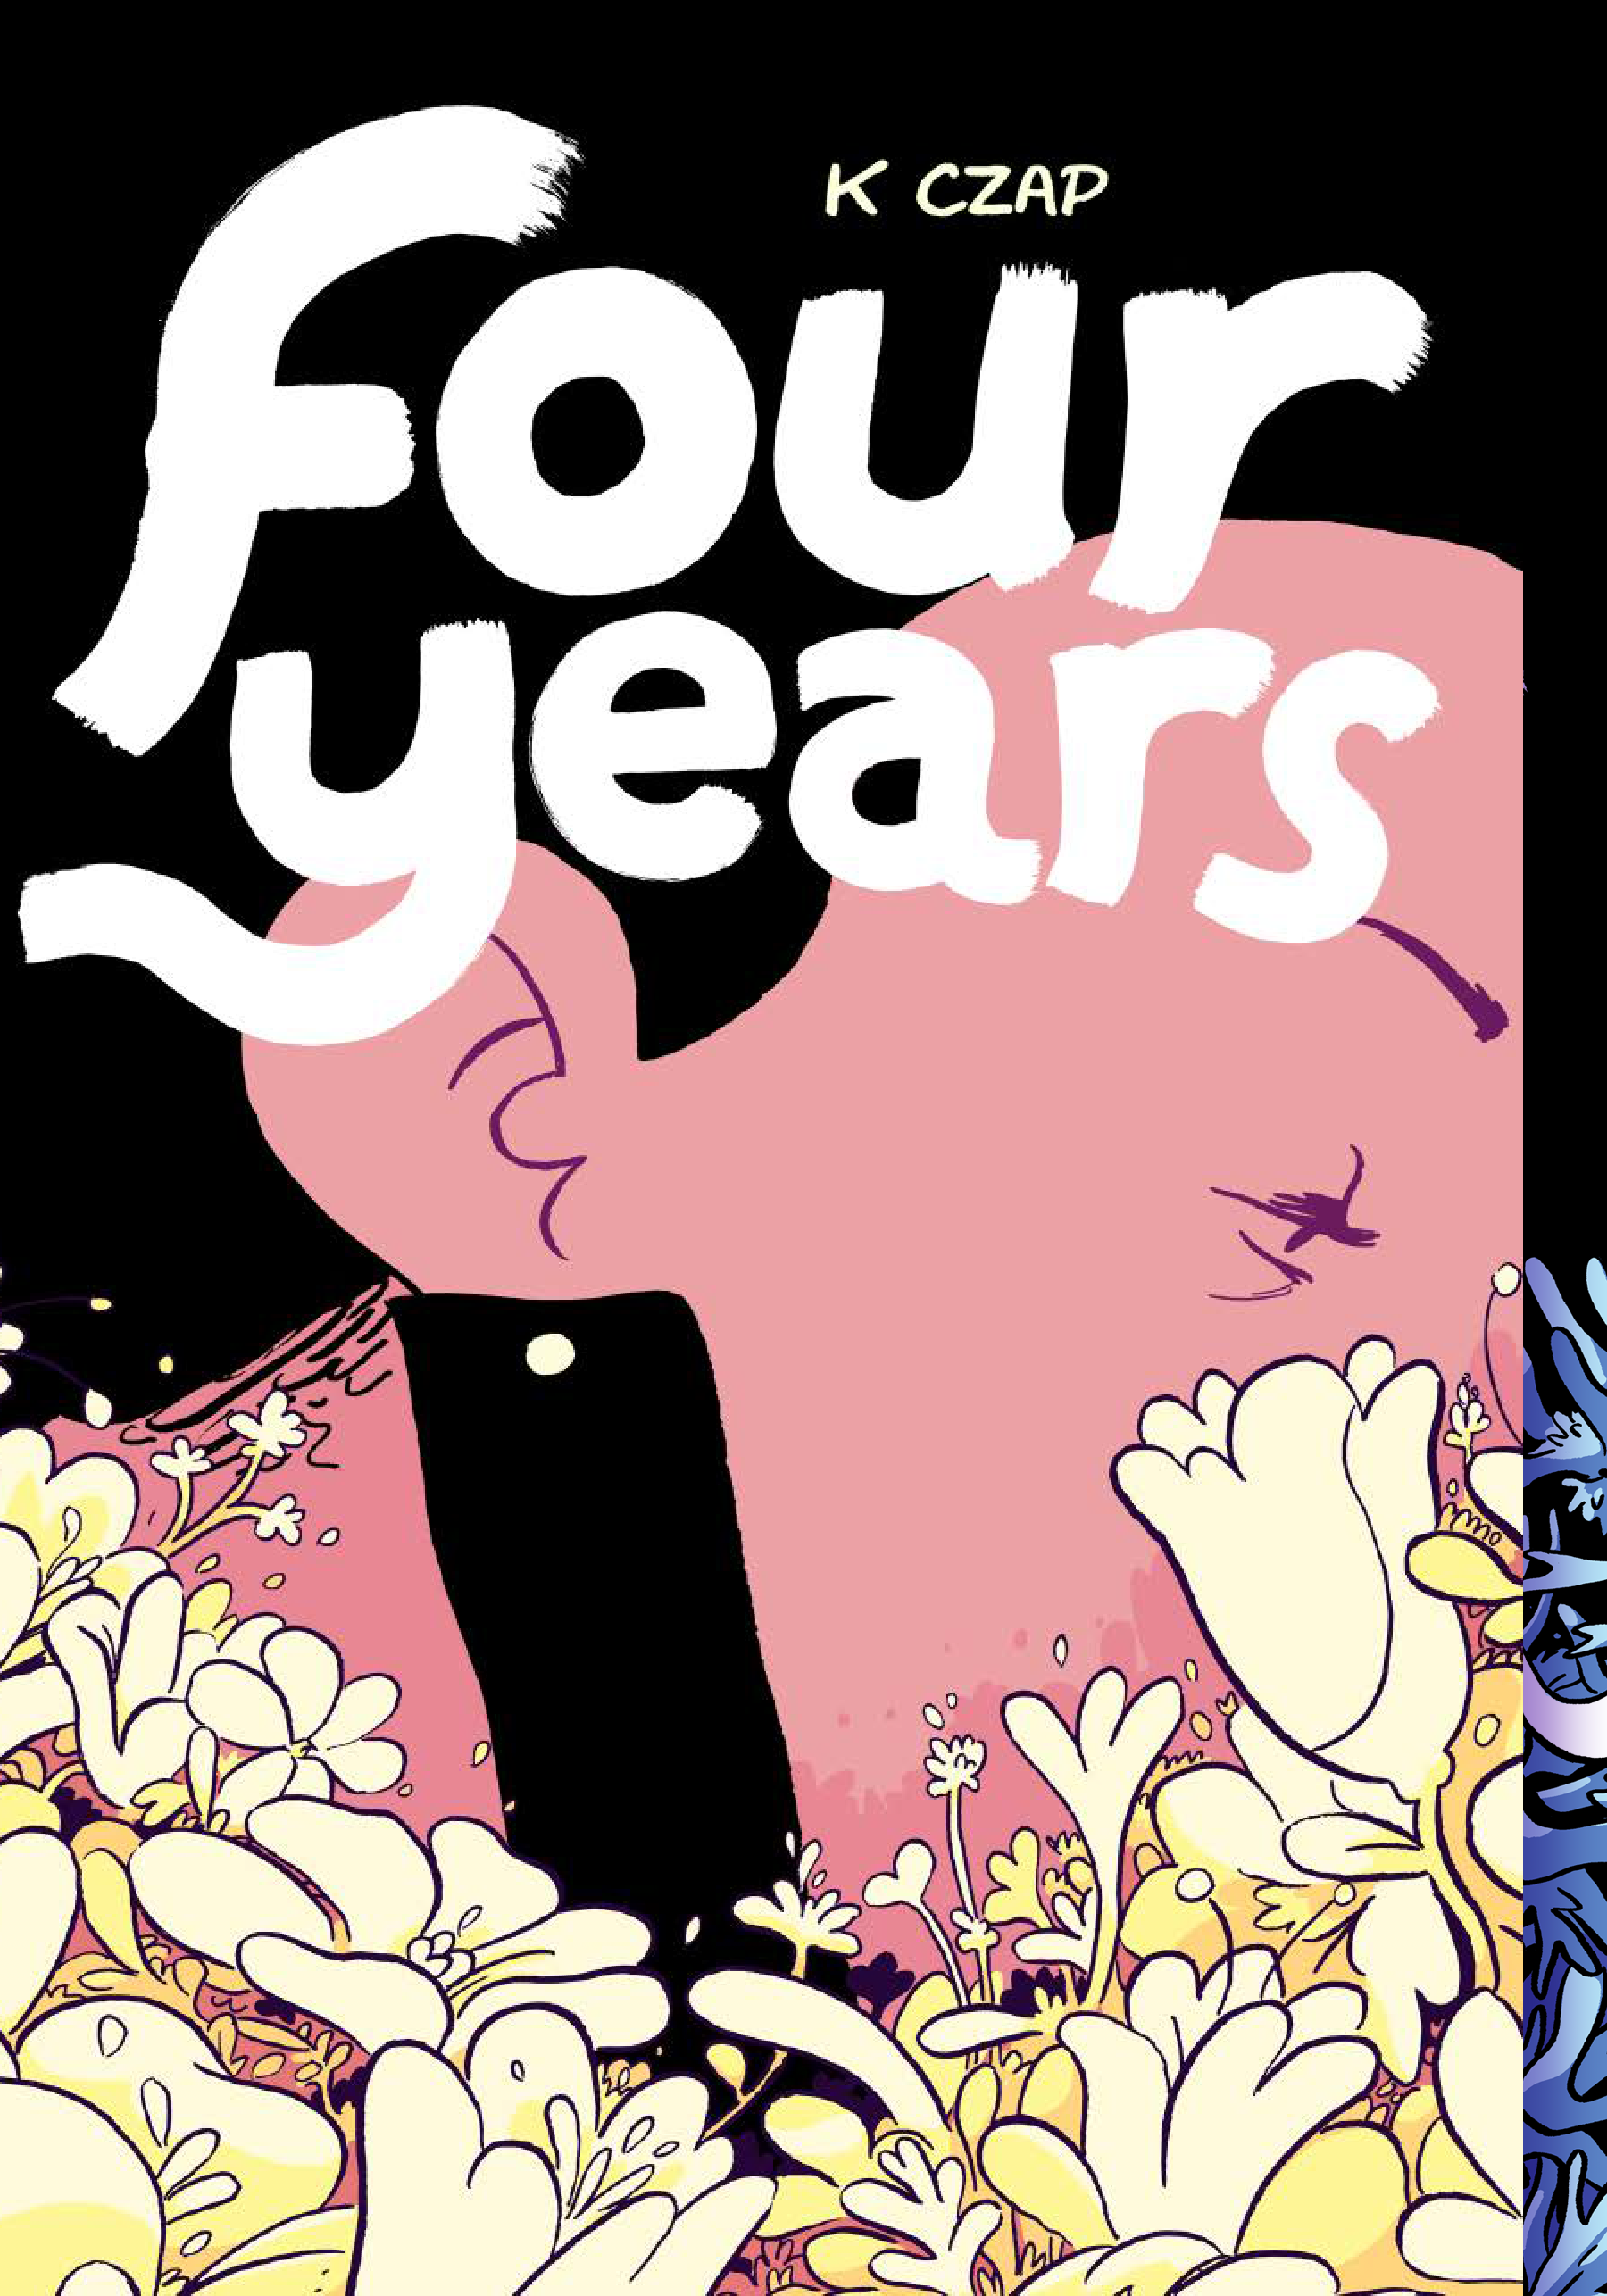 Four Years by K Czap